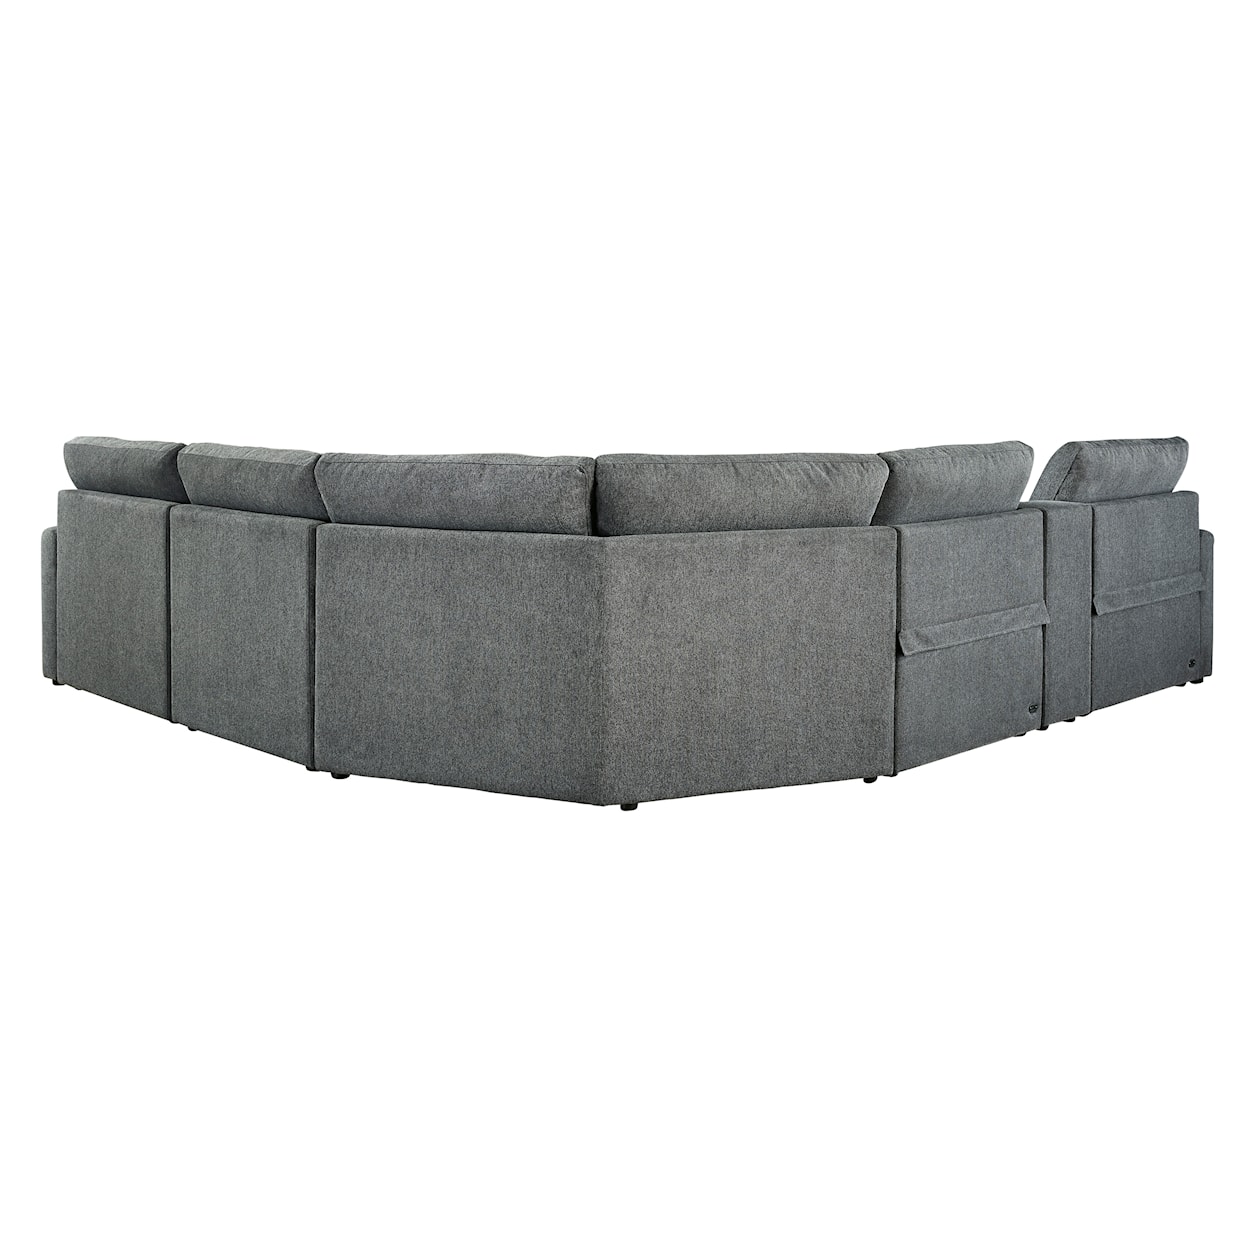 Signature Design by Ashley Hartsdale 6-Piece Power Reclining Sectional